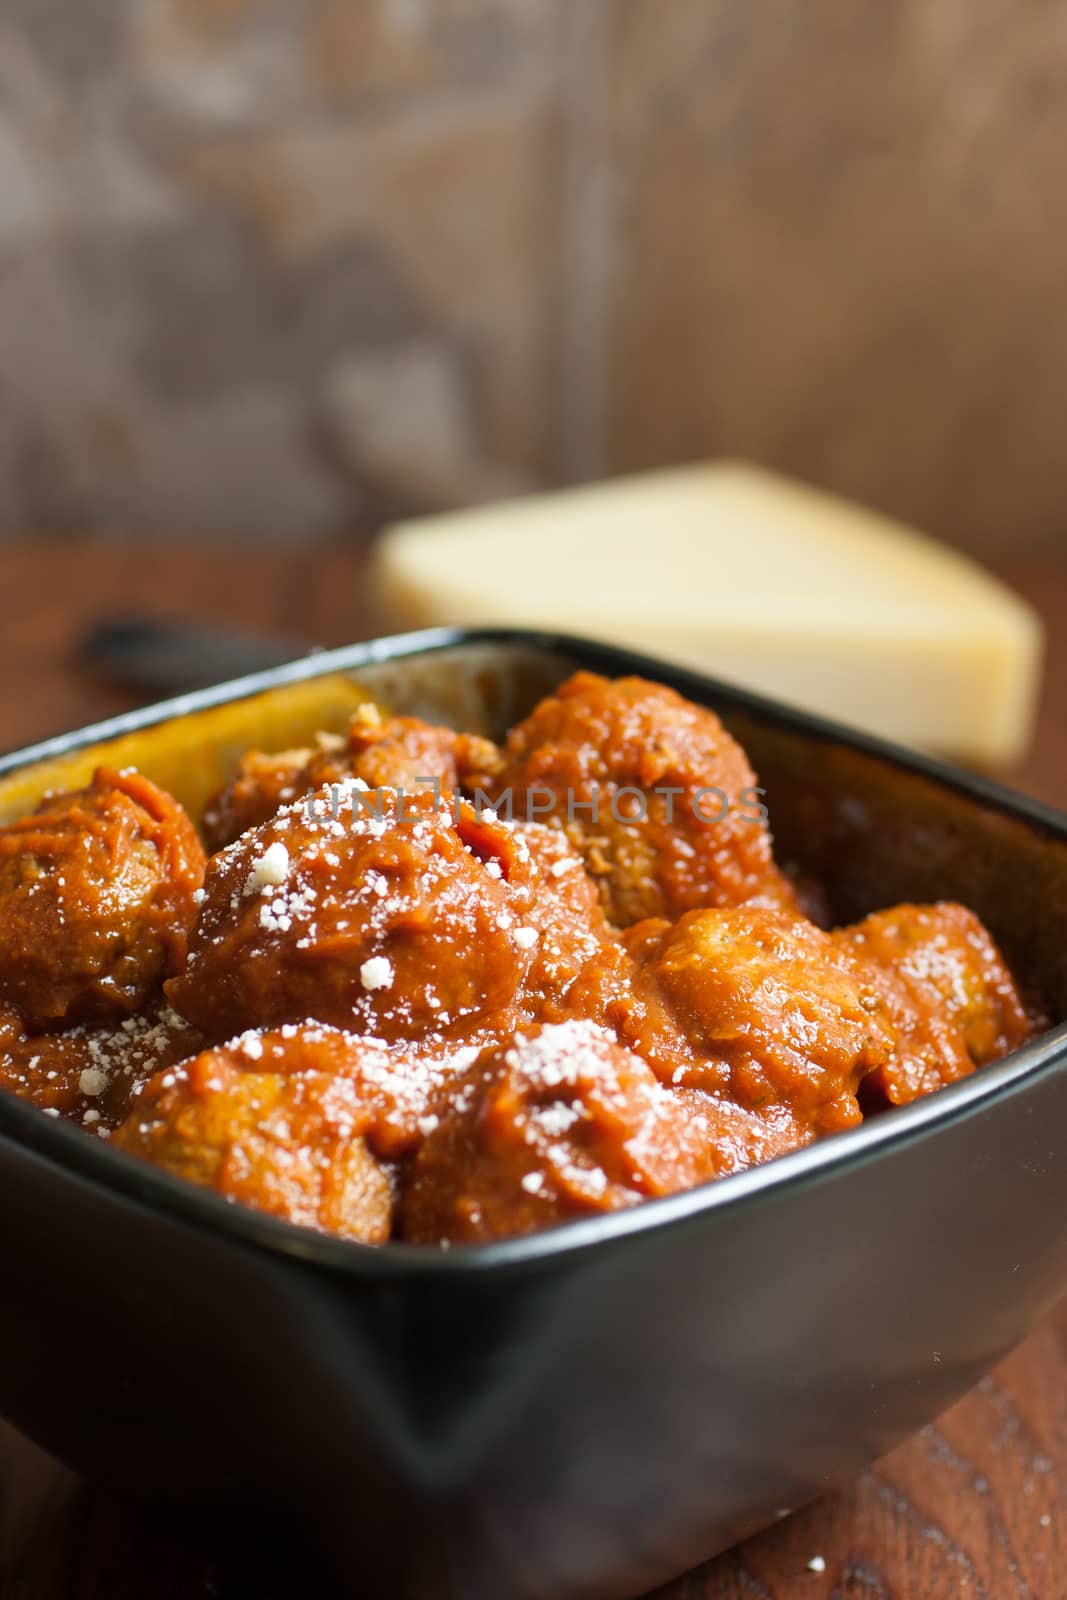 Meatballs in a bowl by SouthernLightStudios